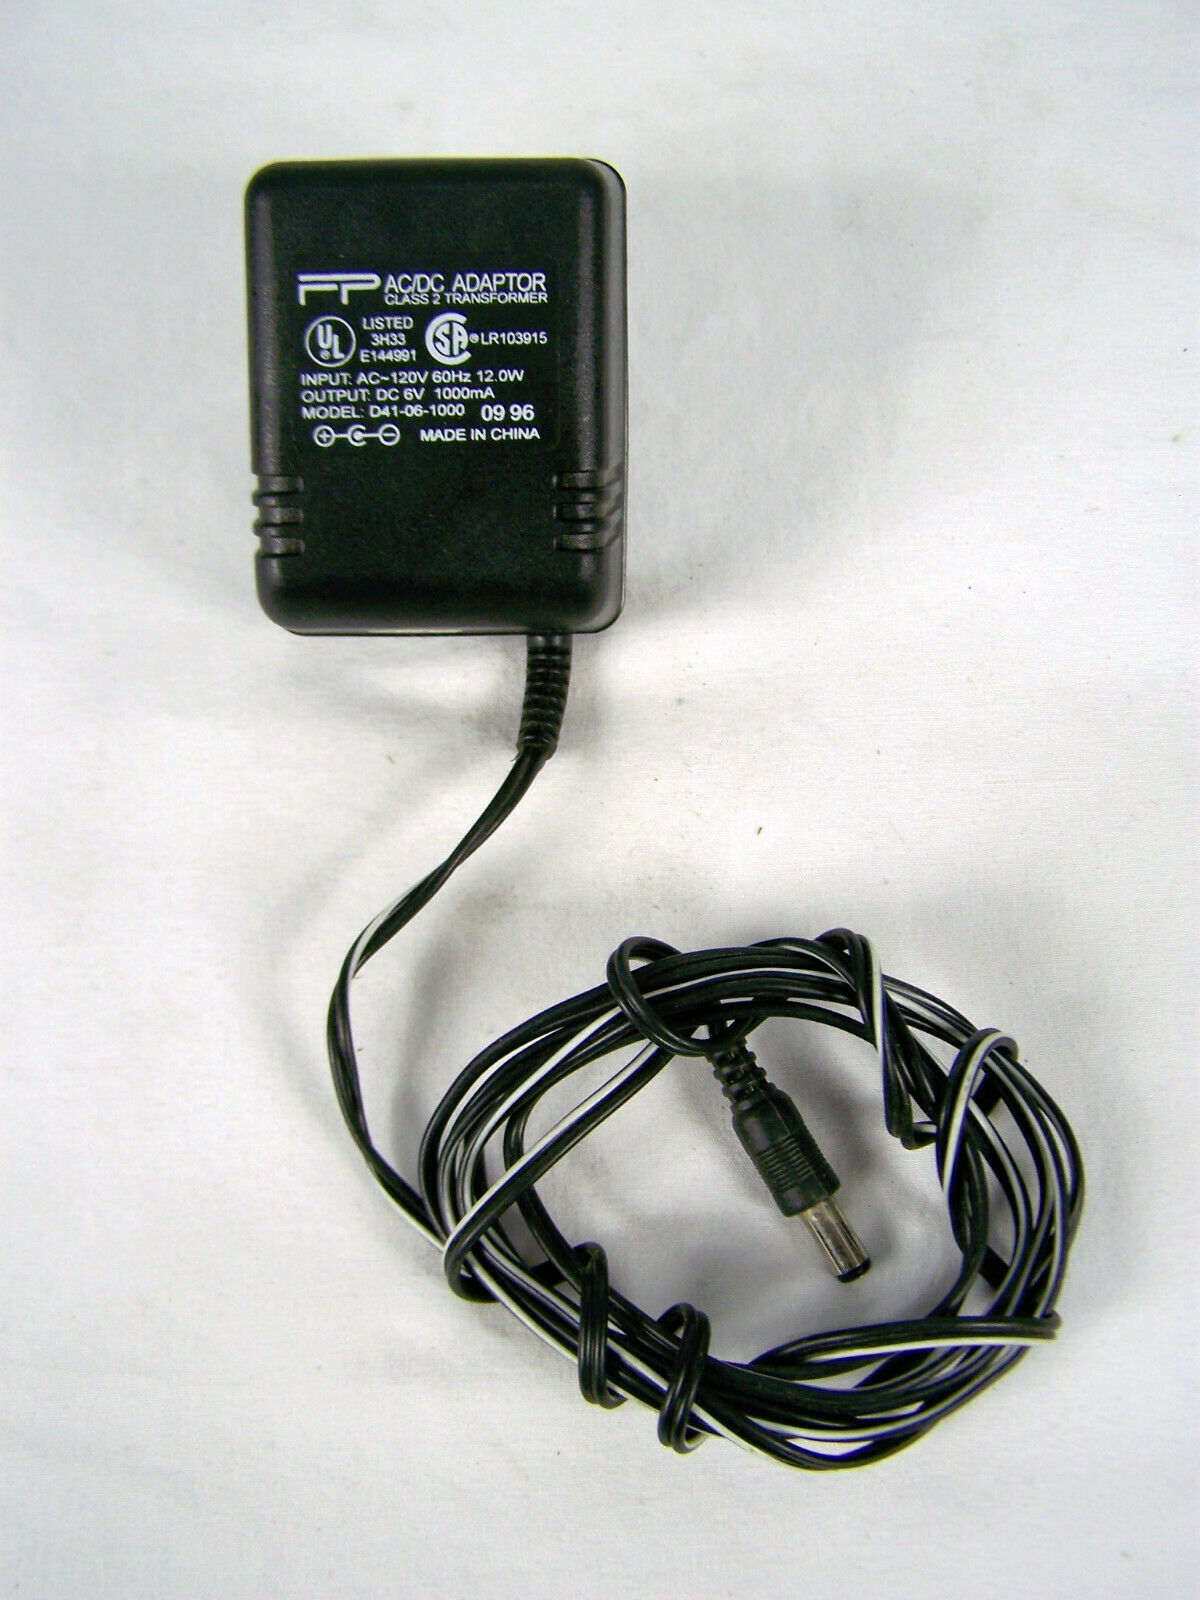 Genuine Midland (DPX351326) Class 2 Transformer AC Adapter Output: 12 Volt DC Country/Region of Manufacture: China Cu